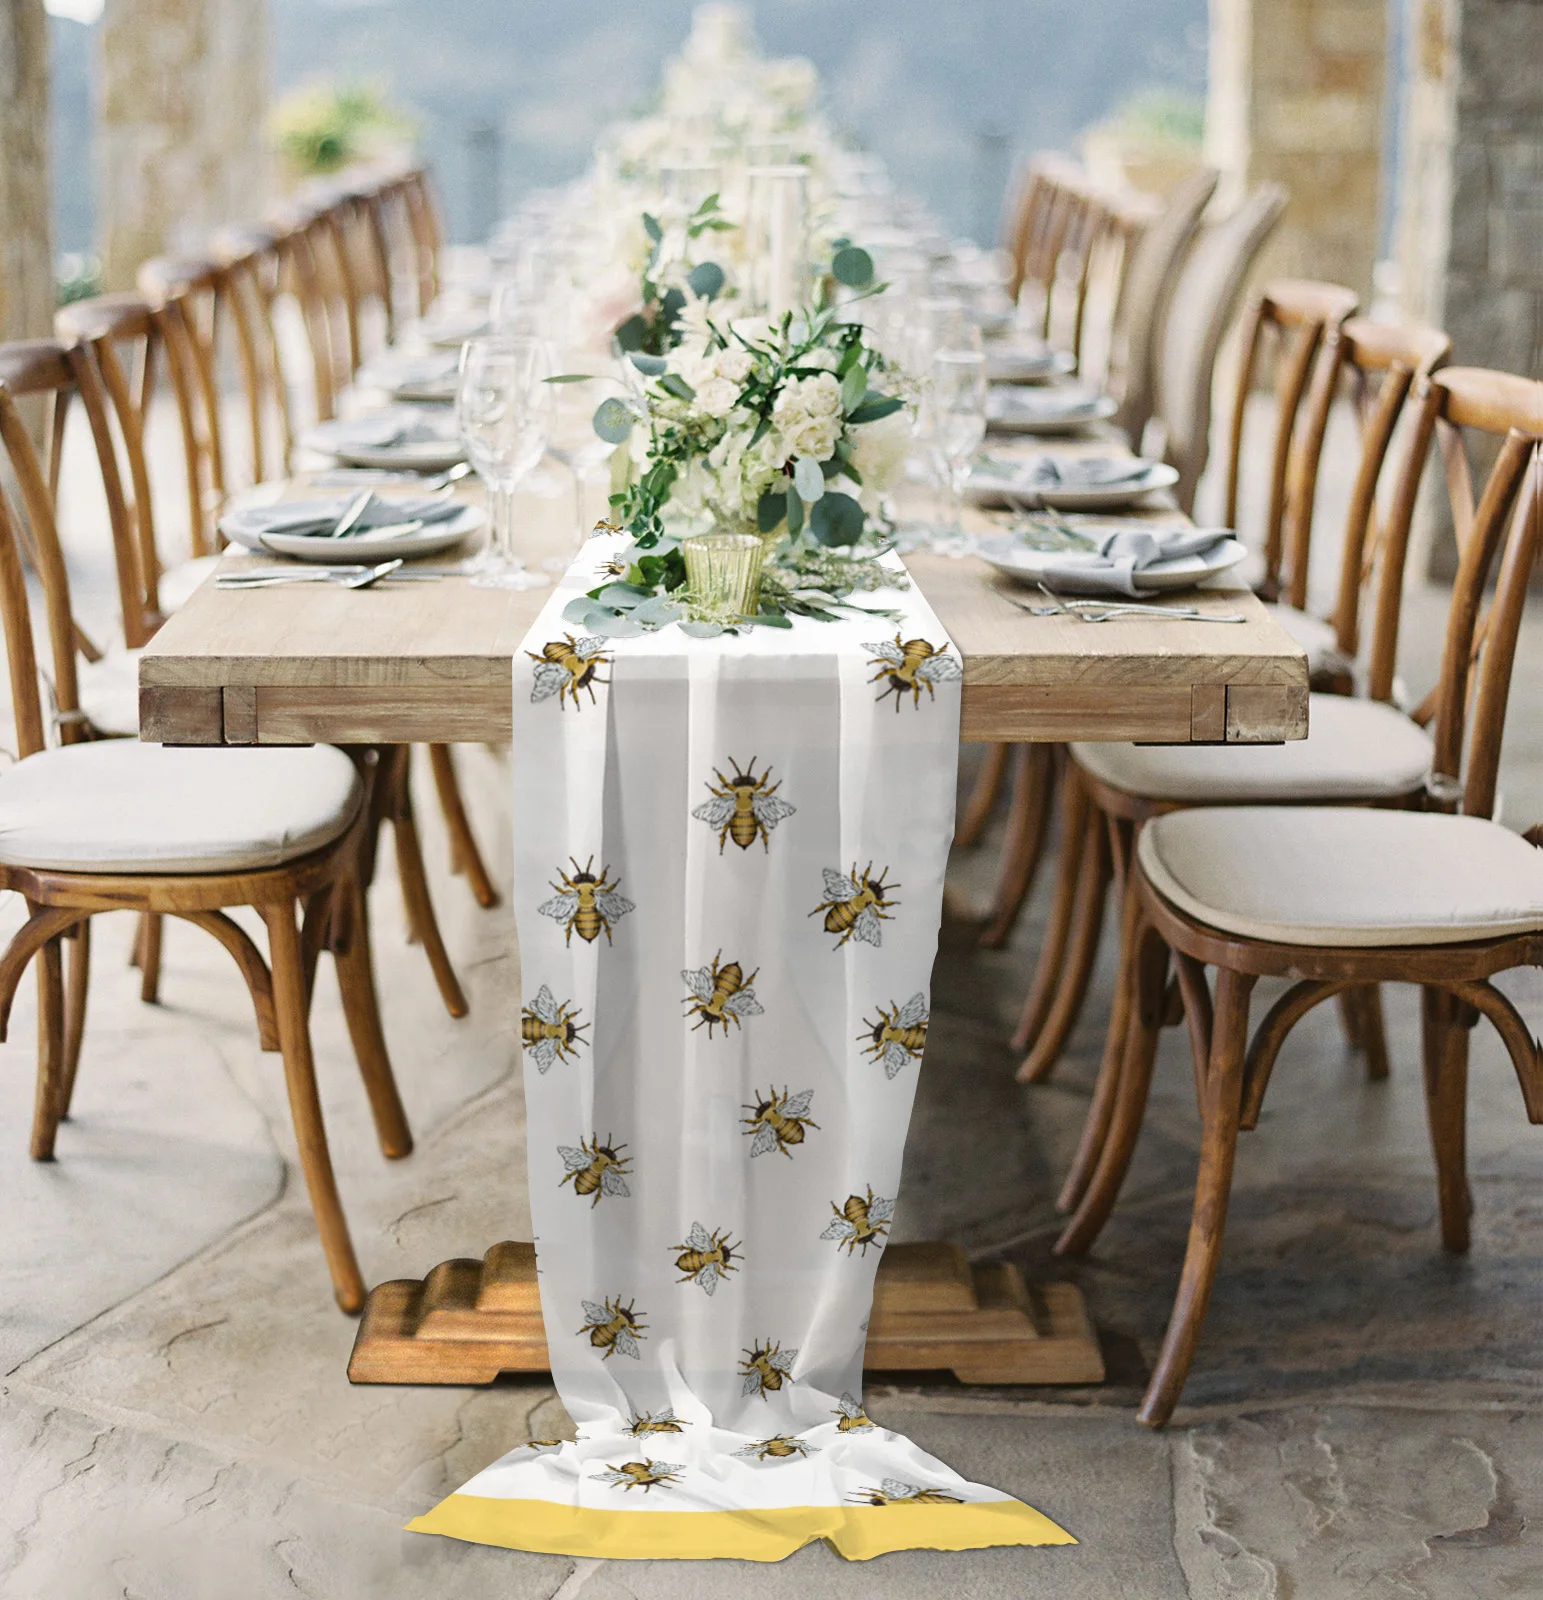 Spring Bee Texture Sheer Chiffon Table Runner Country Wedding Party Birthday Luxury Tulle Voile Tablecloth Home Decoration